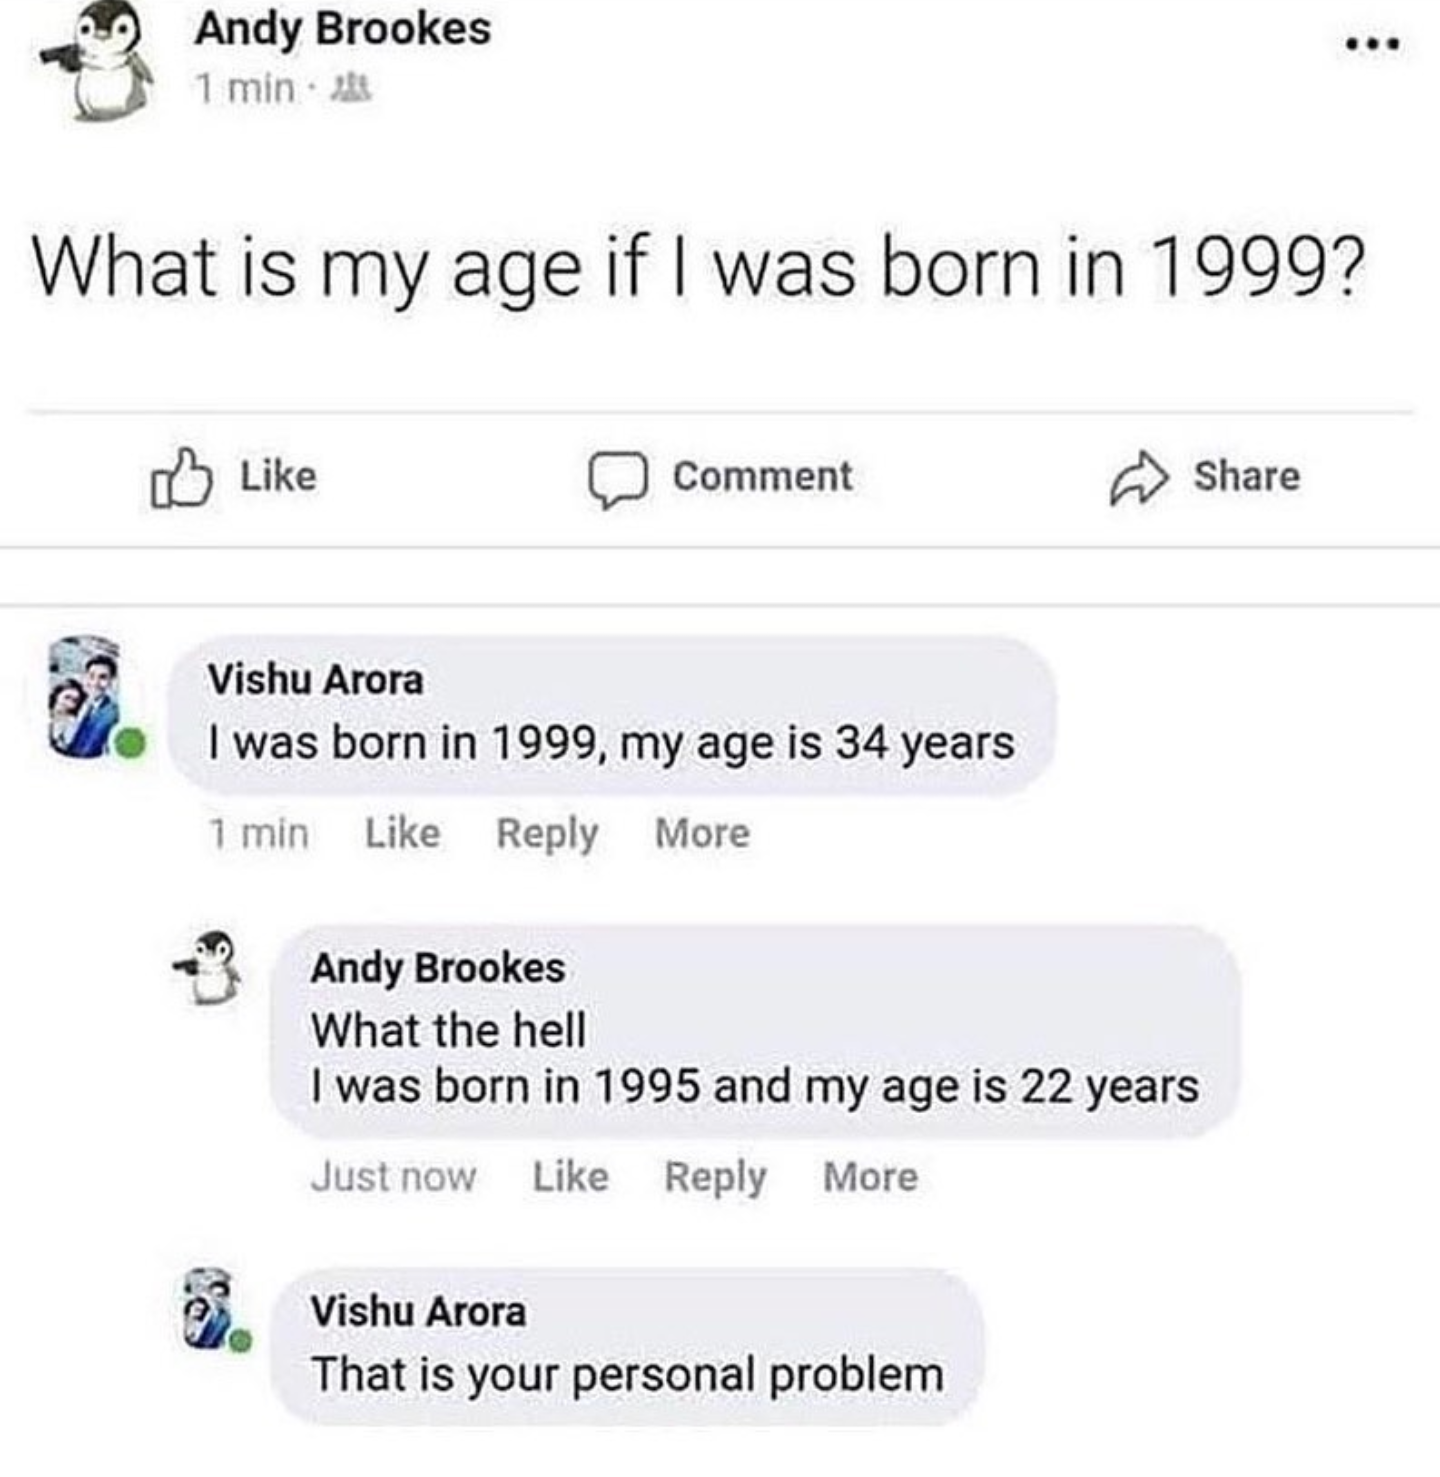 number - Andy Brookes 1 min. What is my age if I was born in 1999? Comment Vishu Arora I was born in 1999, my age is 34 years 1 min More Andy Brookes What the hell I was born in 1995 and my age is 22 years Just now More Vishu Arora That is your personal p